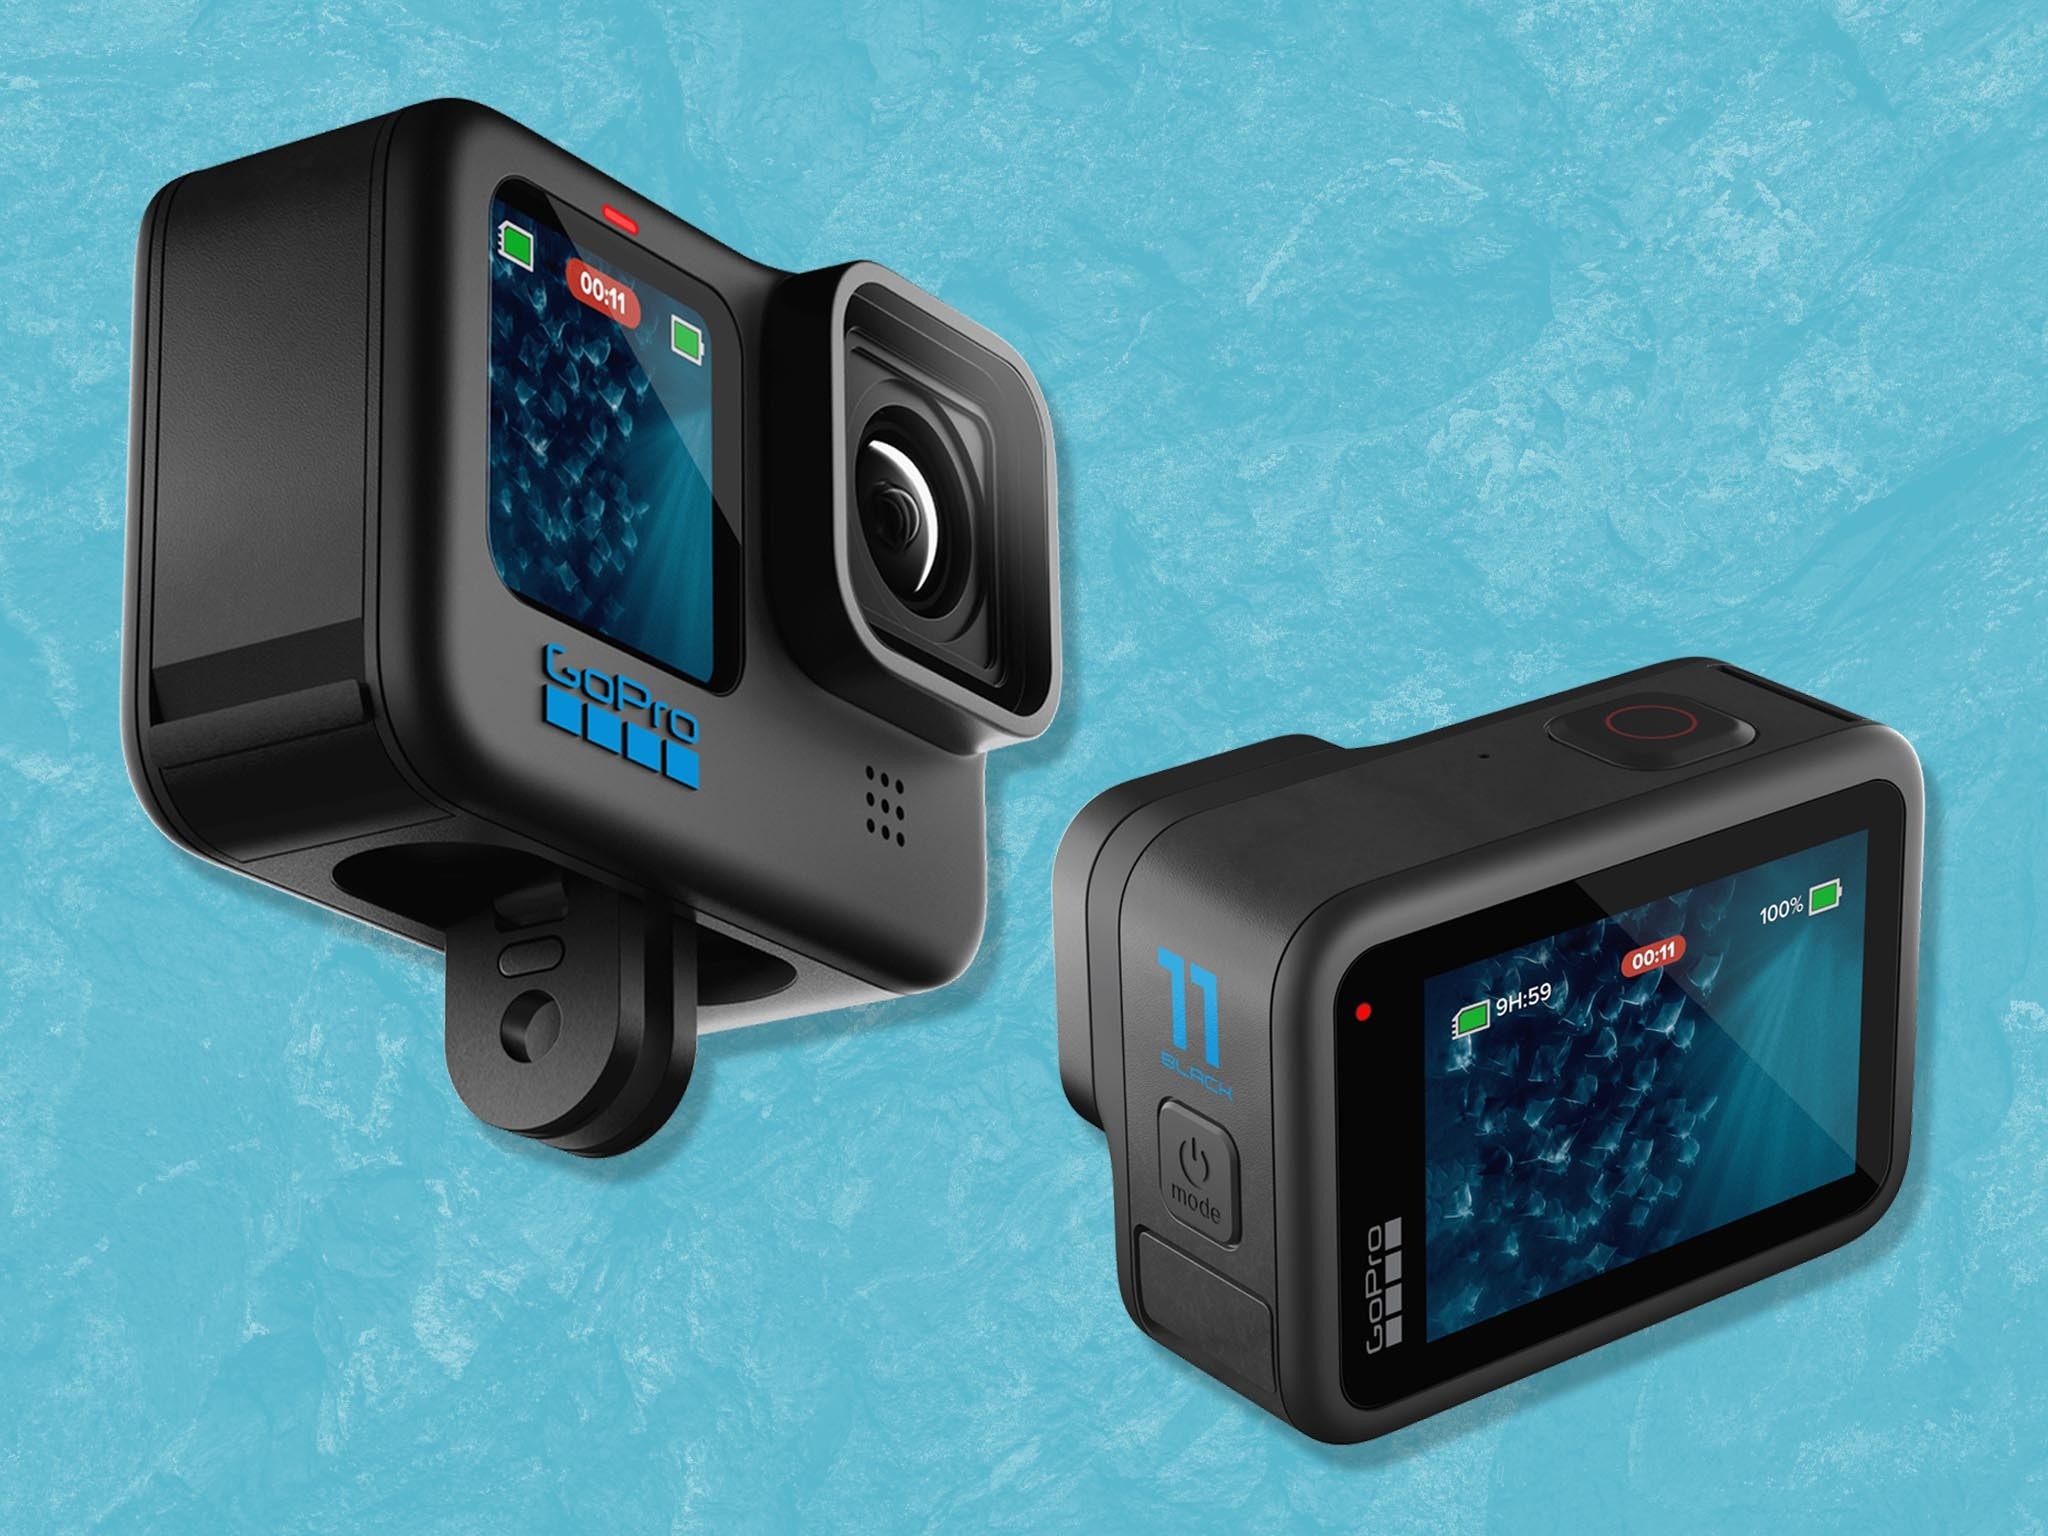 The action cameras fall back down to pre-pandemic prices